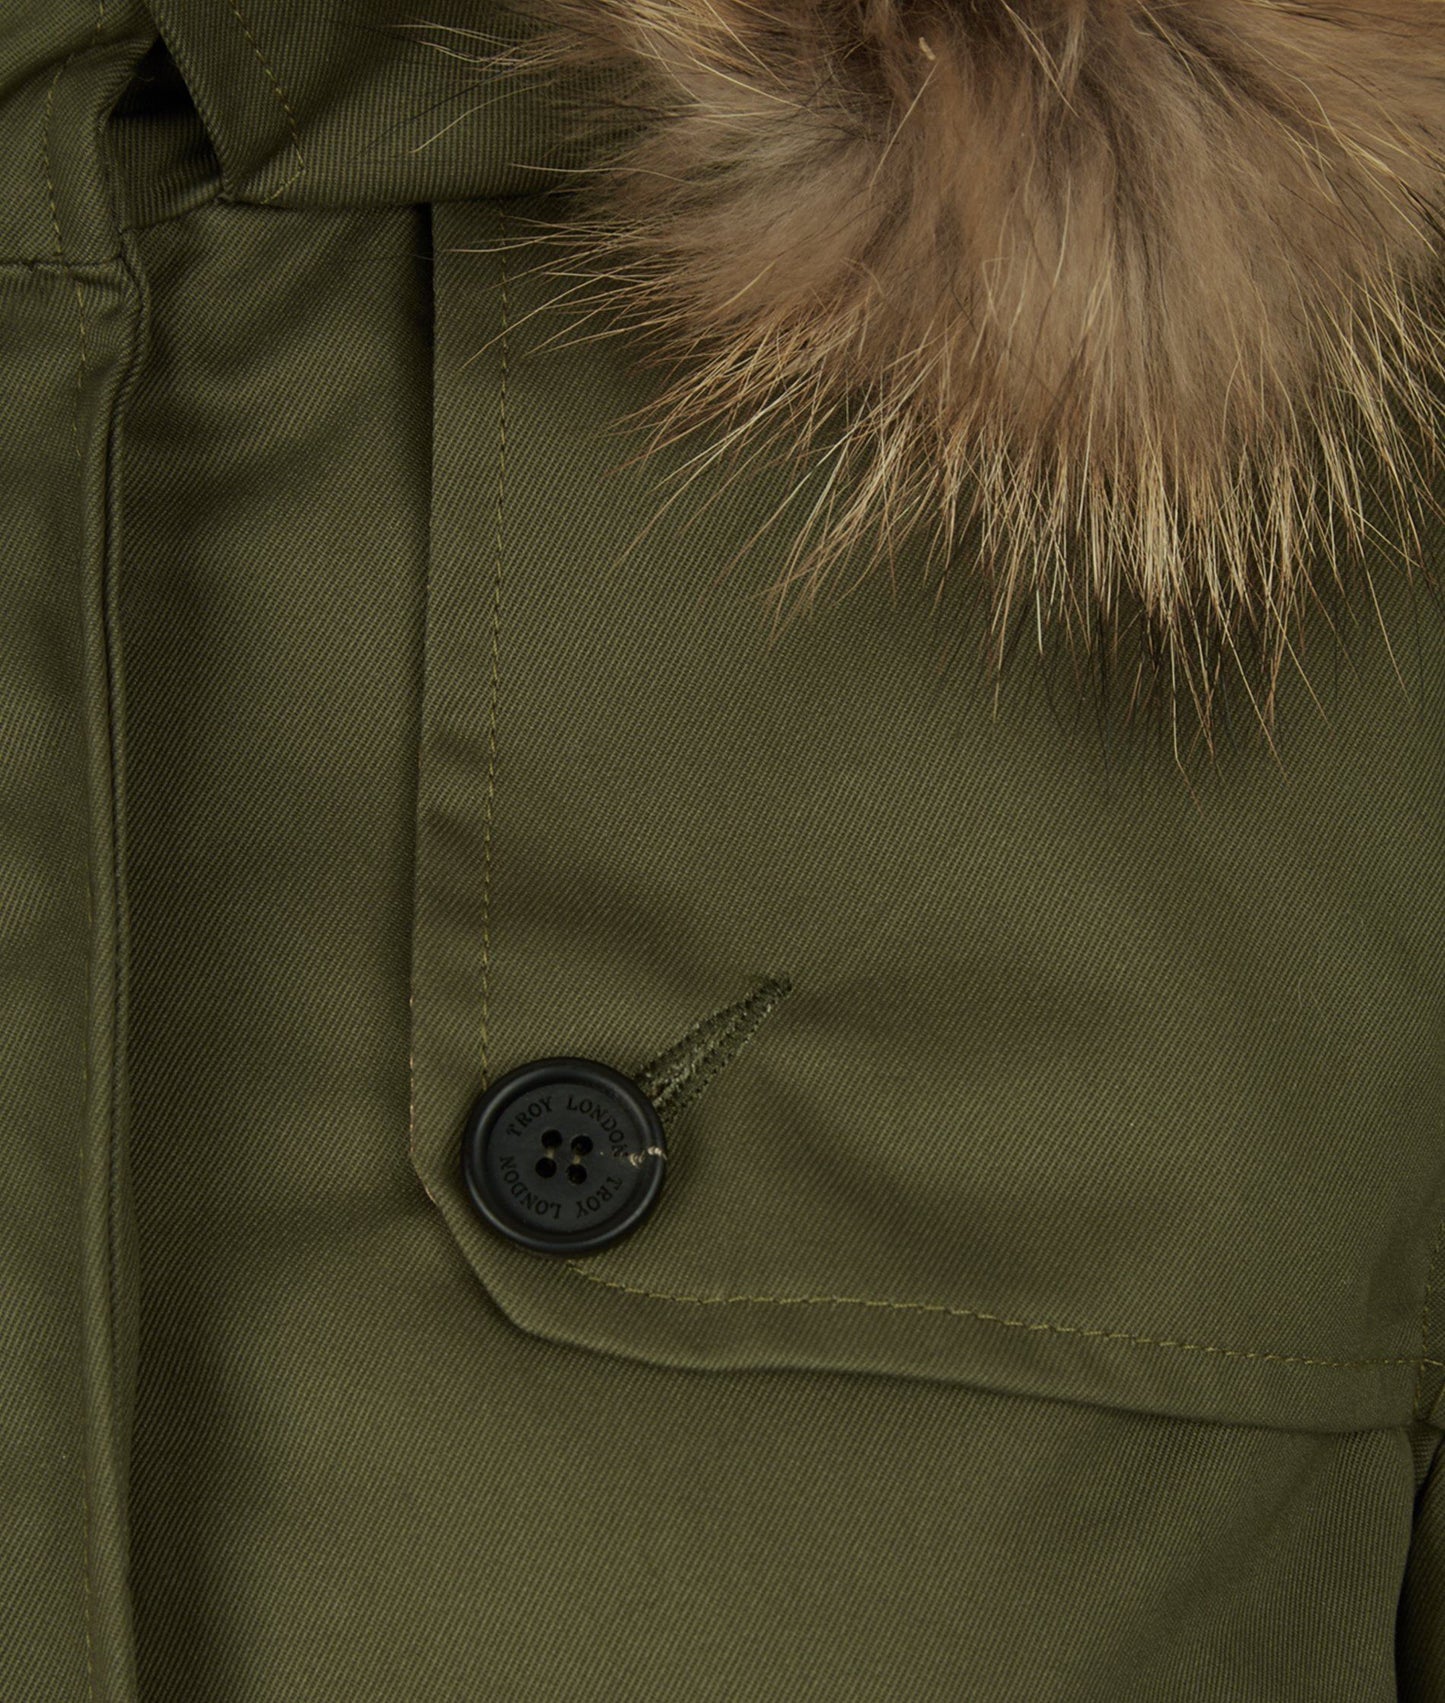 TROY Parka in Military Green